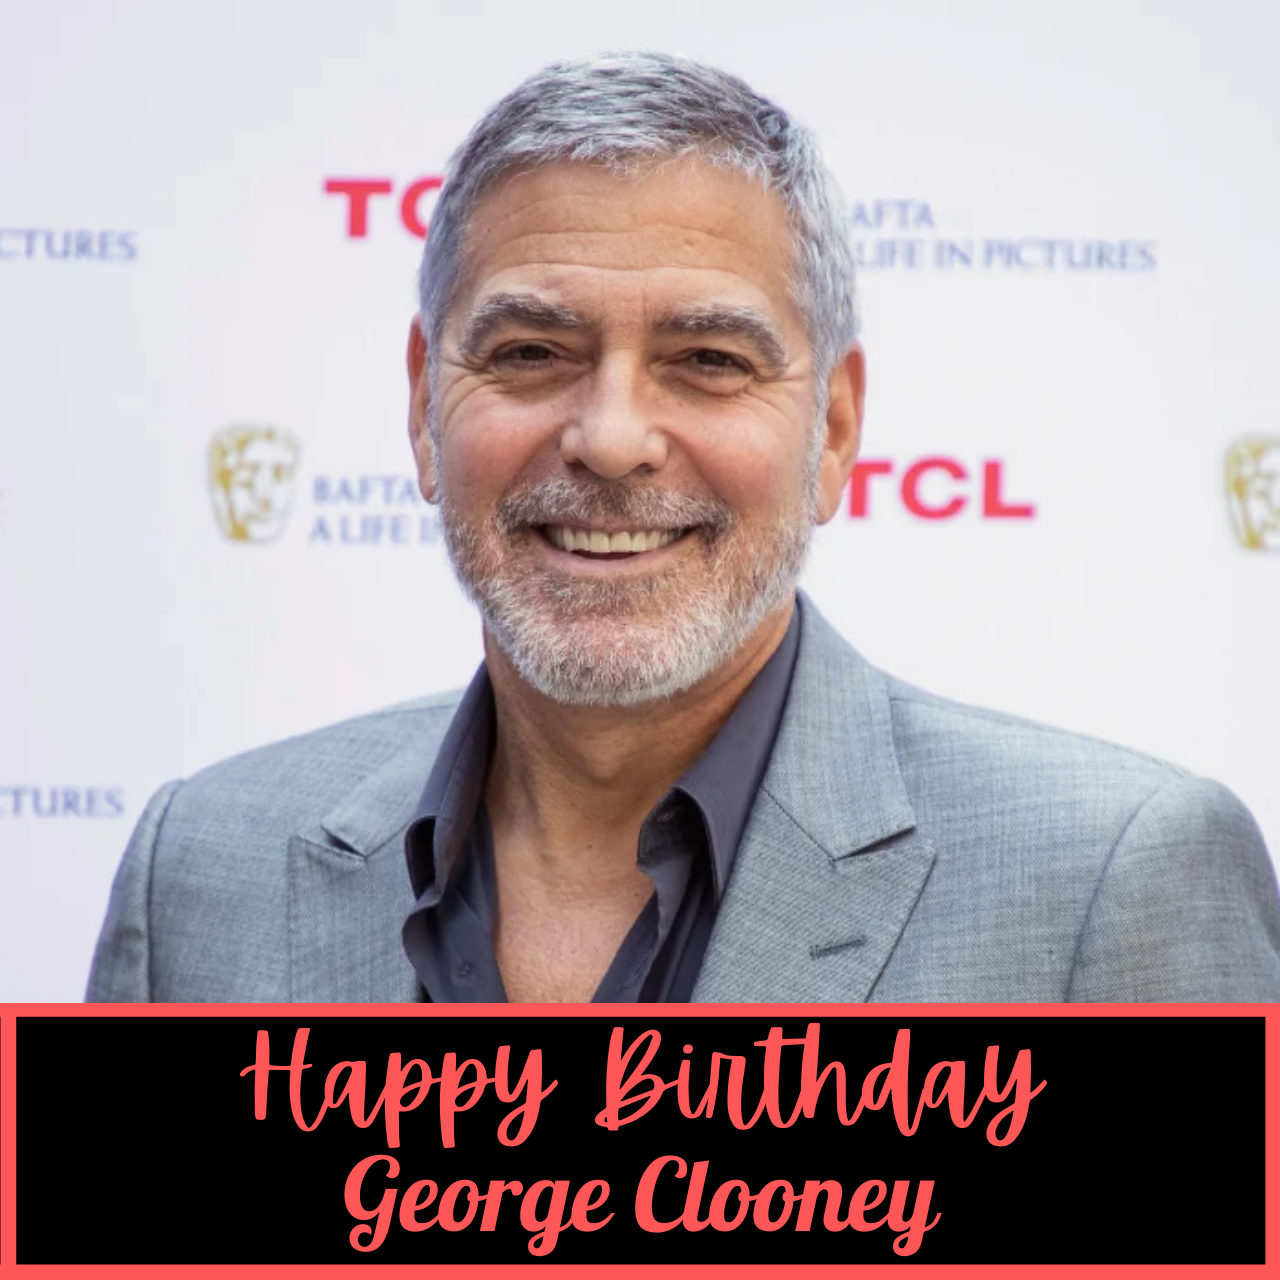 Happy Birthday George Clooney: Top Wishes, Greetings, Images, Memes to Greet 'Gravity' Star